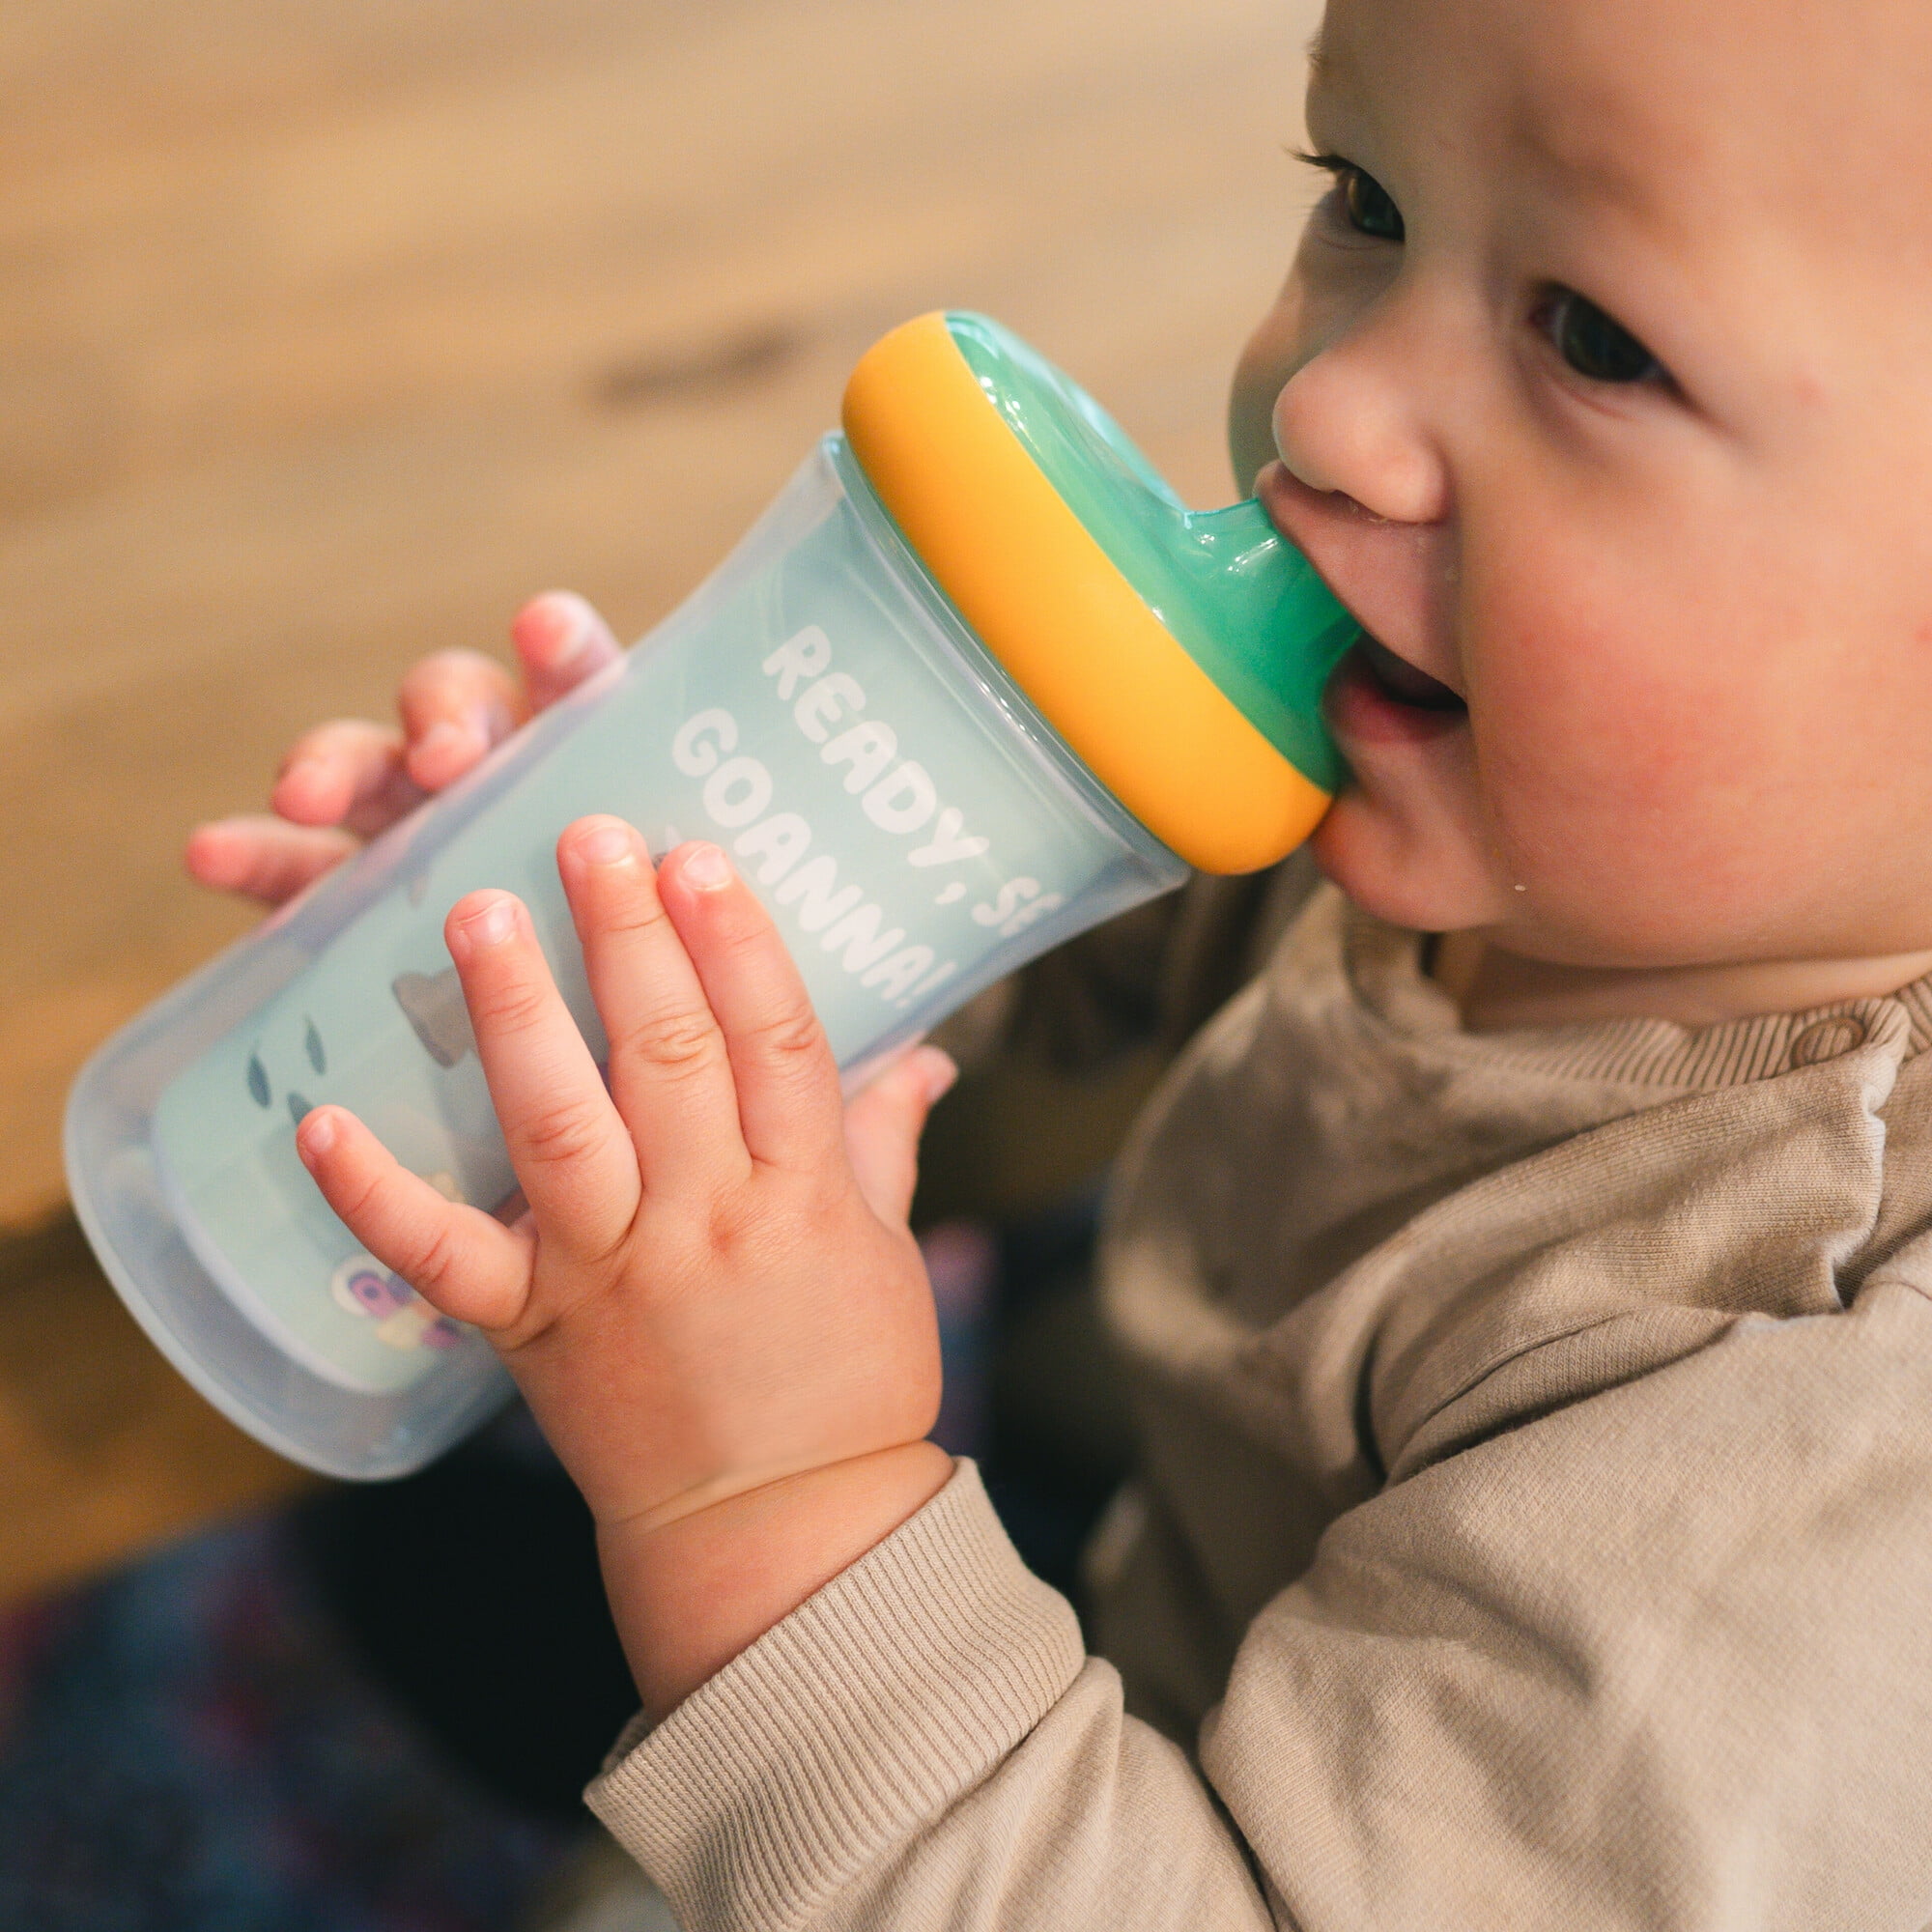  The First Years Bluey Sip & See Toddler Water Bottle -  Includes Floating Charm - Toddler Cups with Straw - 12 Oz - Ages 24 Months  and Up : Baby